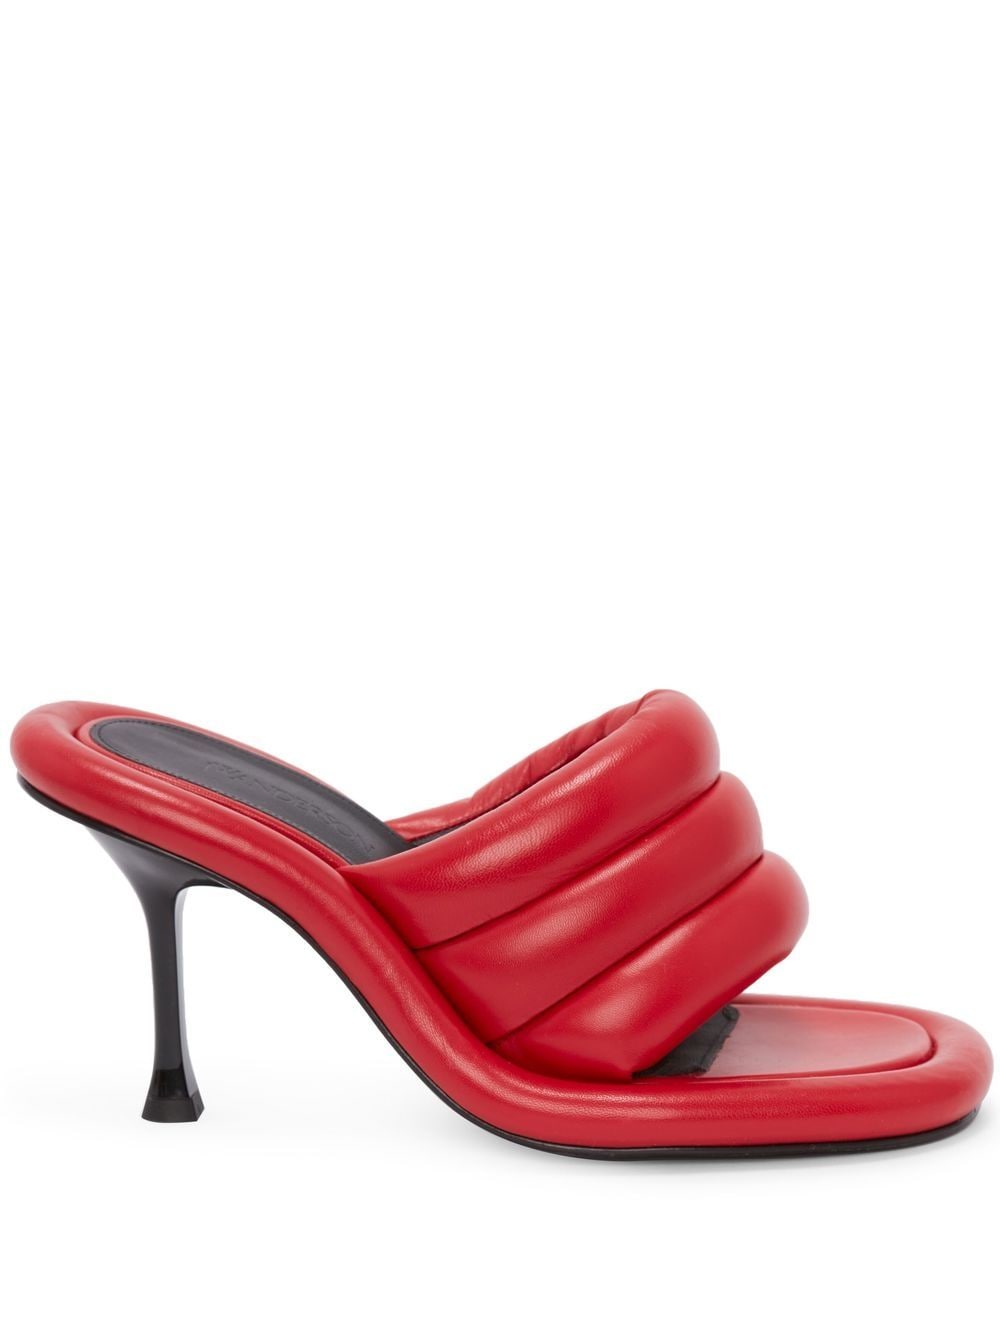 JW Anderson Bumper padded sandals - Red